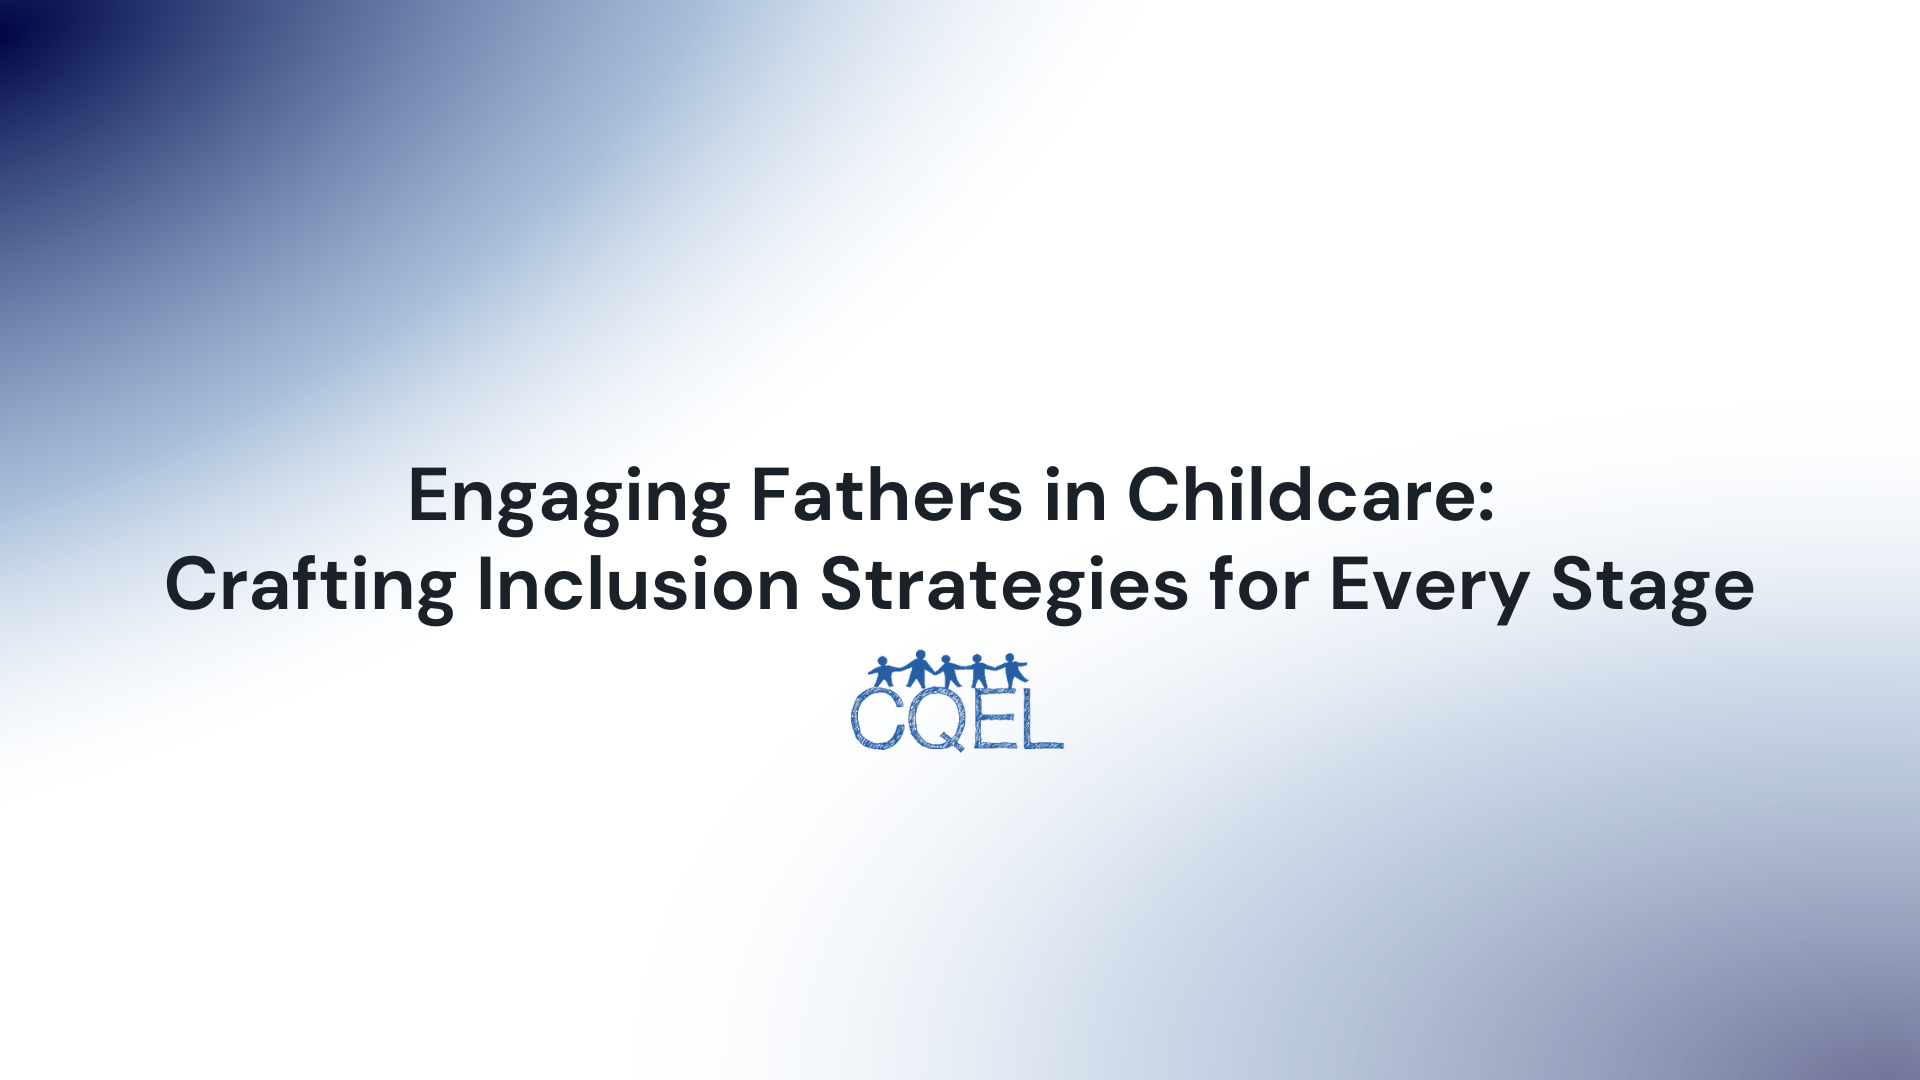 Engaging Fathers in Childcare: Crafting Inclusion Strategies for Every Stage